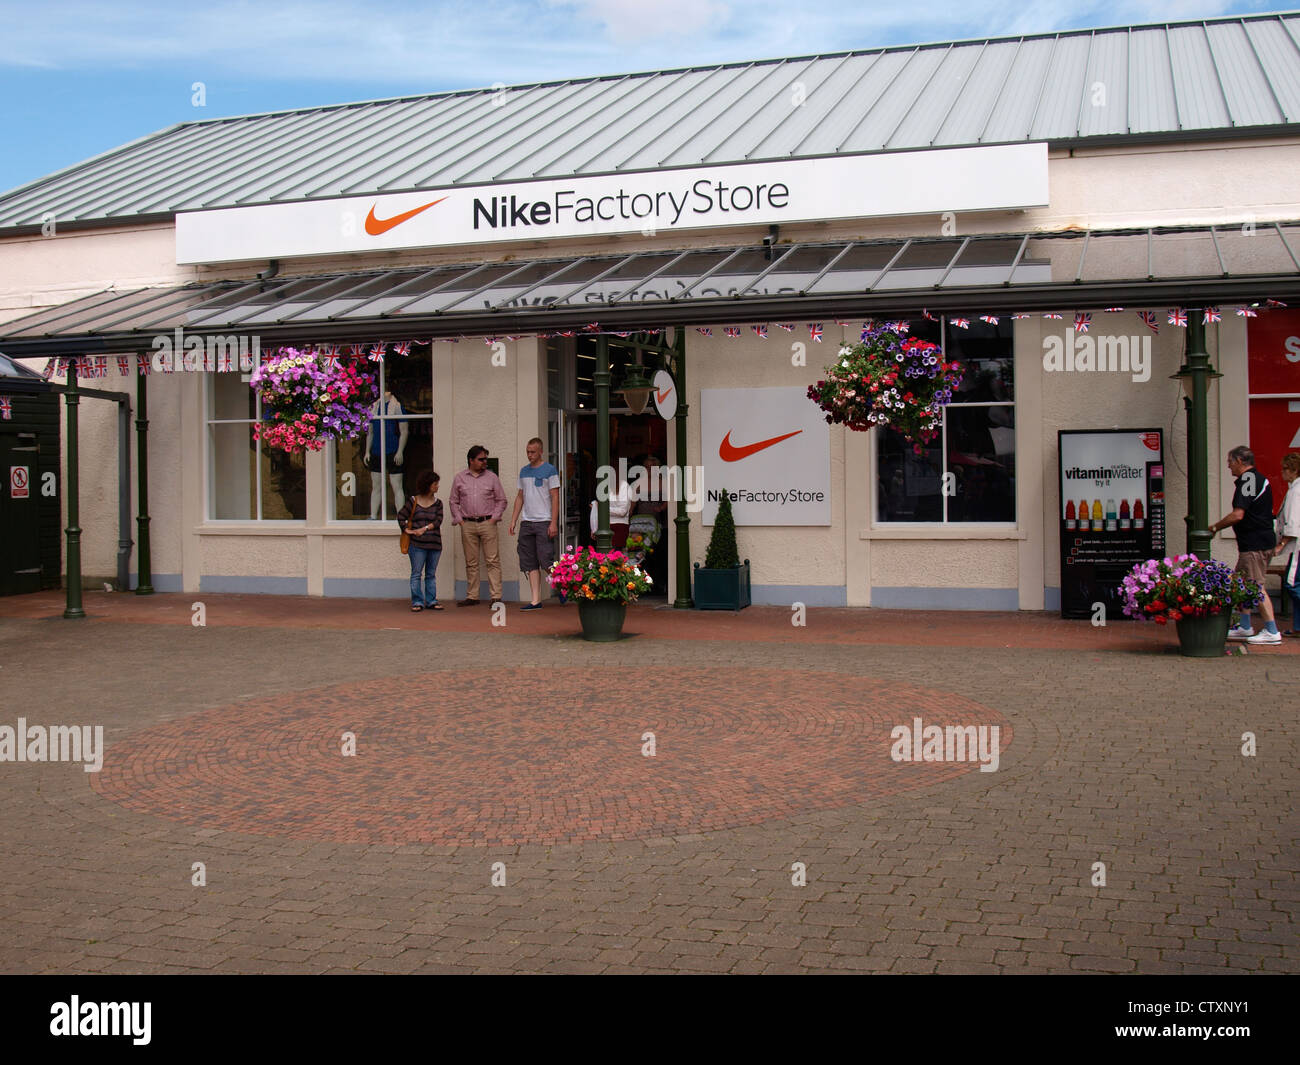 Roppenheim, France - Oct 7, 2017: Facade of Nike Factory store in